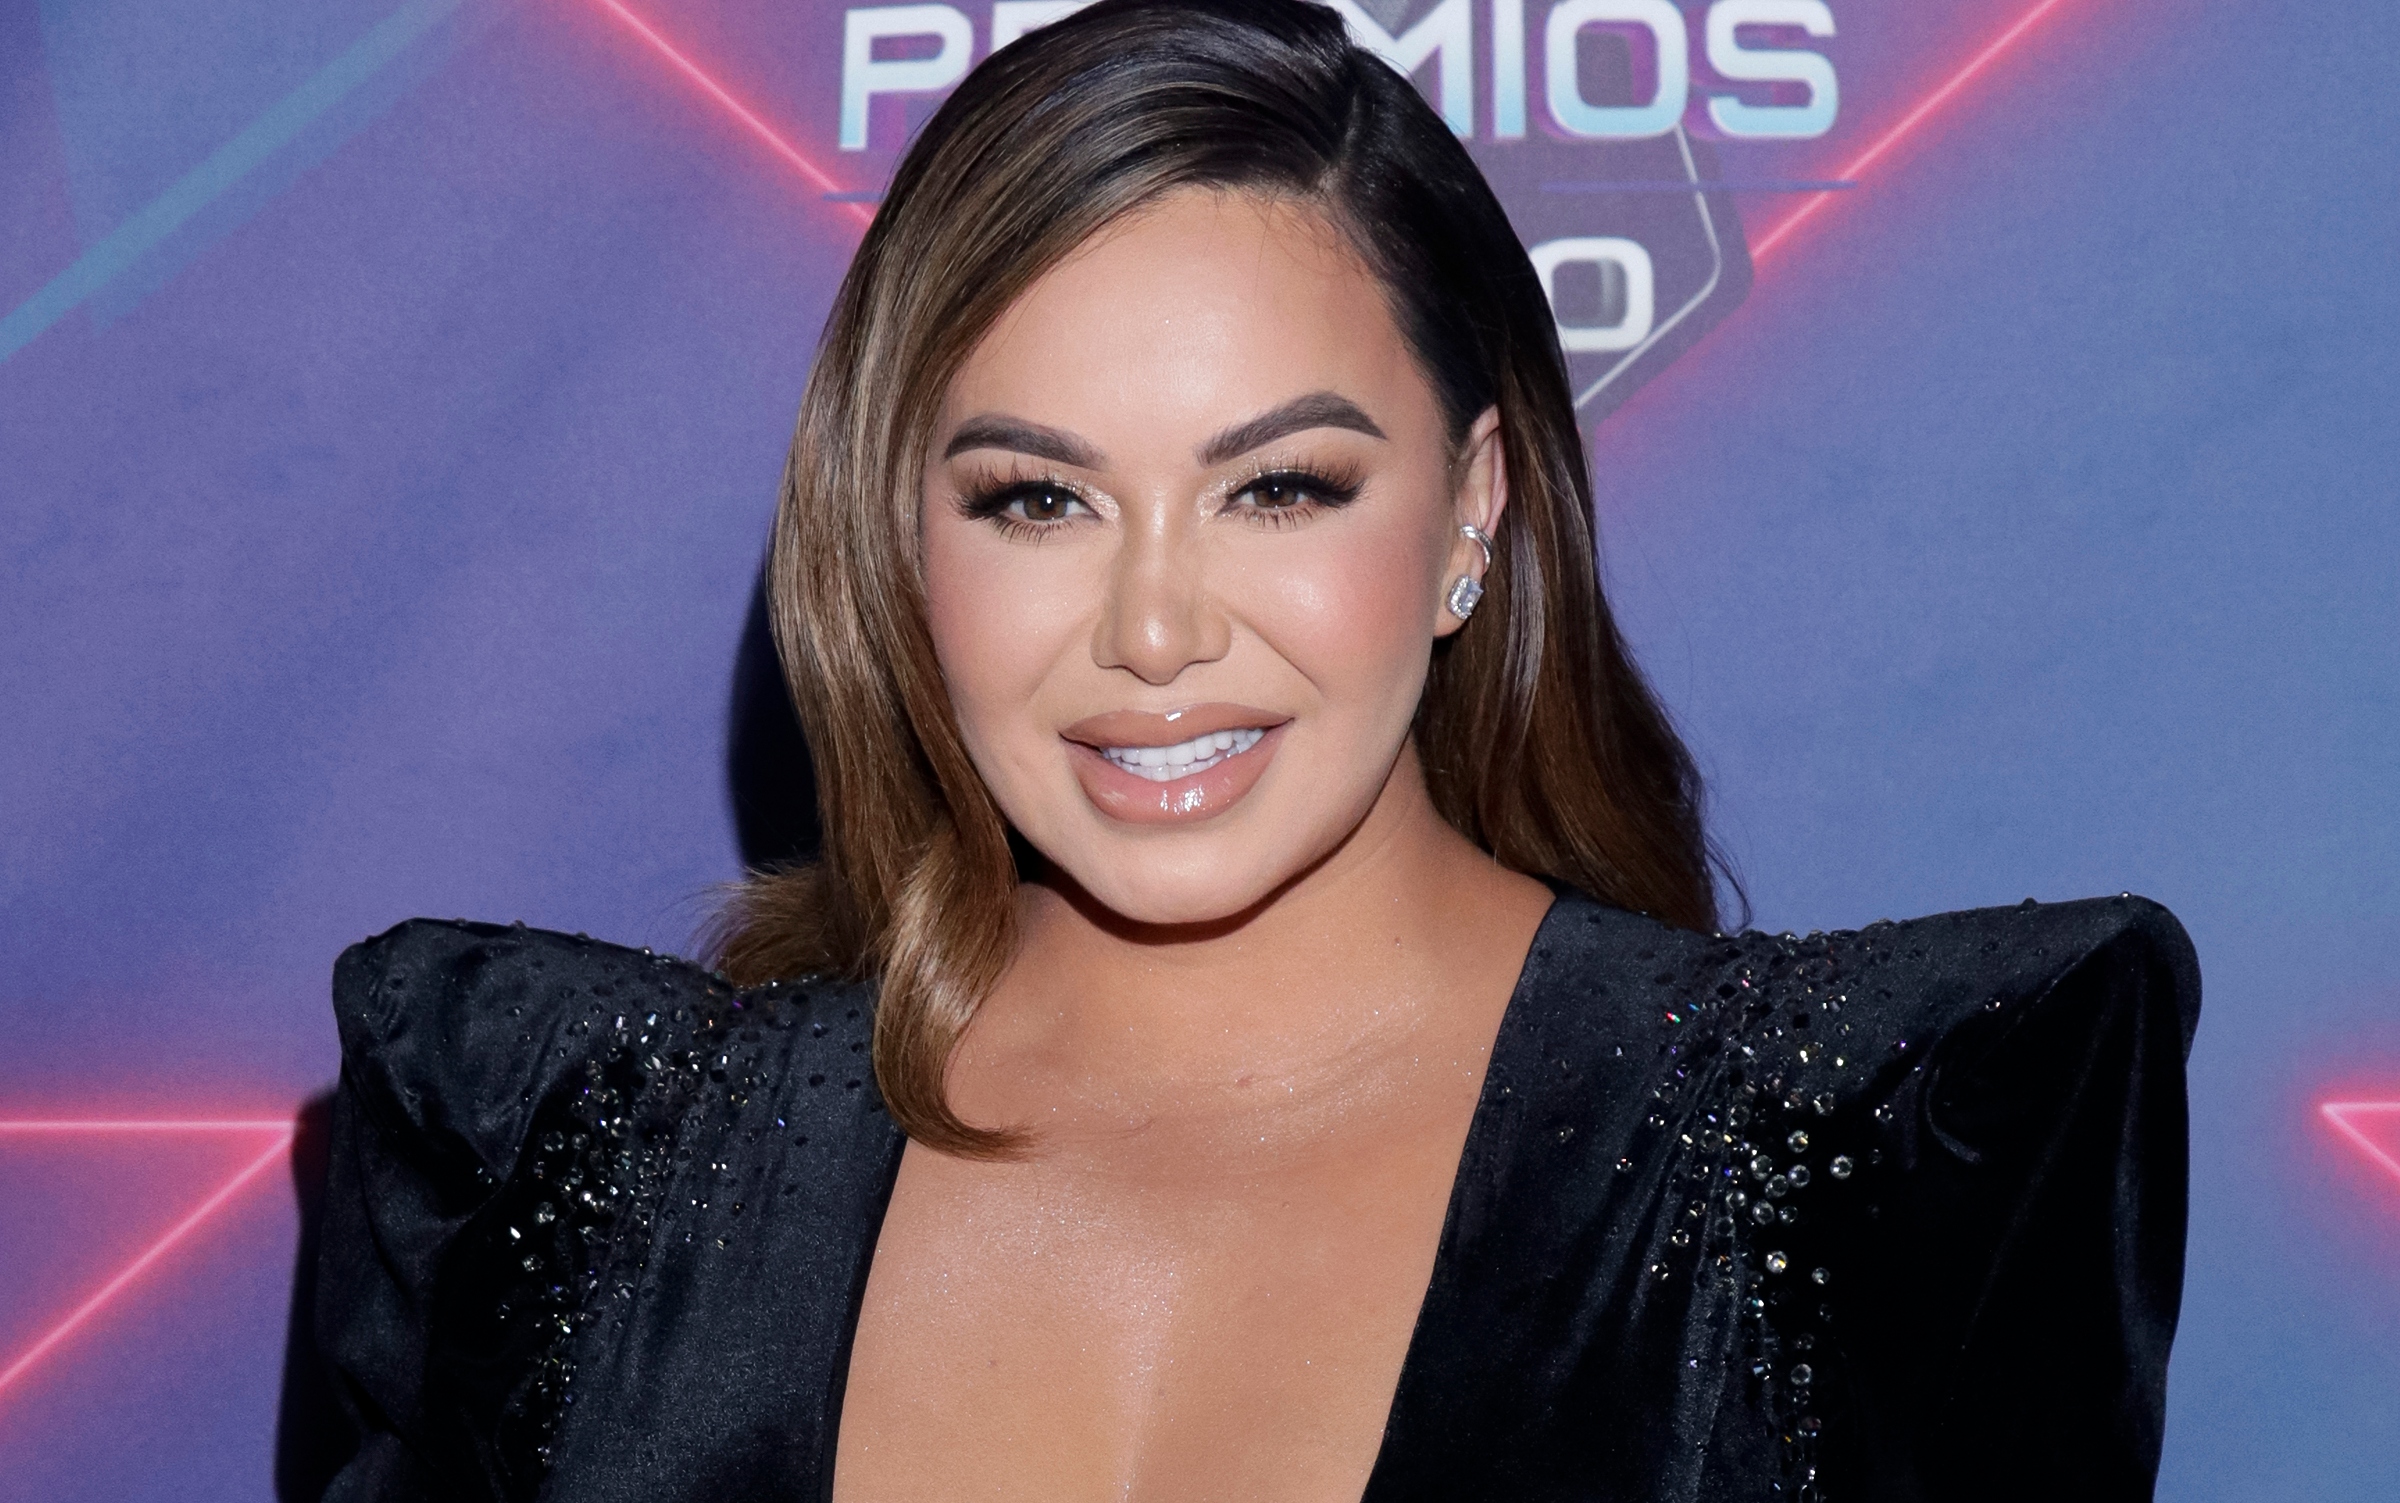 Chiquis Rivera Shows Off Her Curves On Stage Wearing A Tight Black Jumpsuit With Openings 